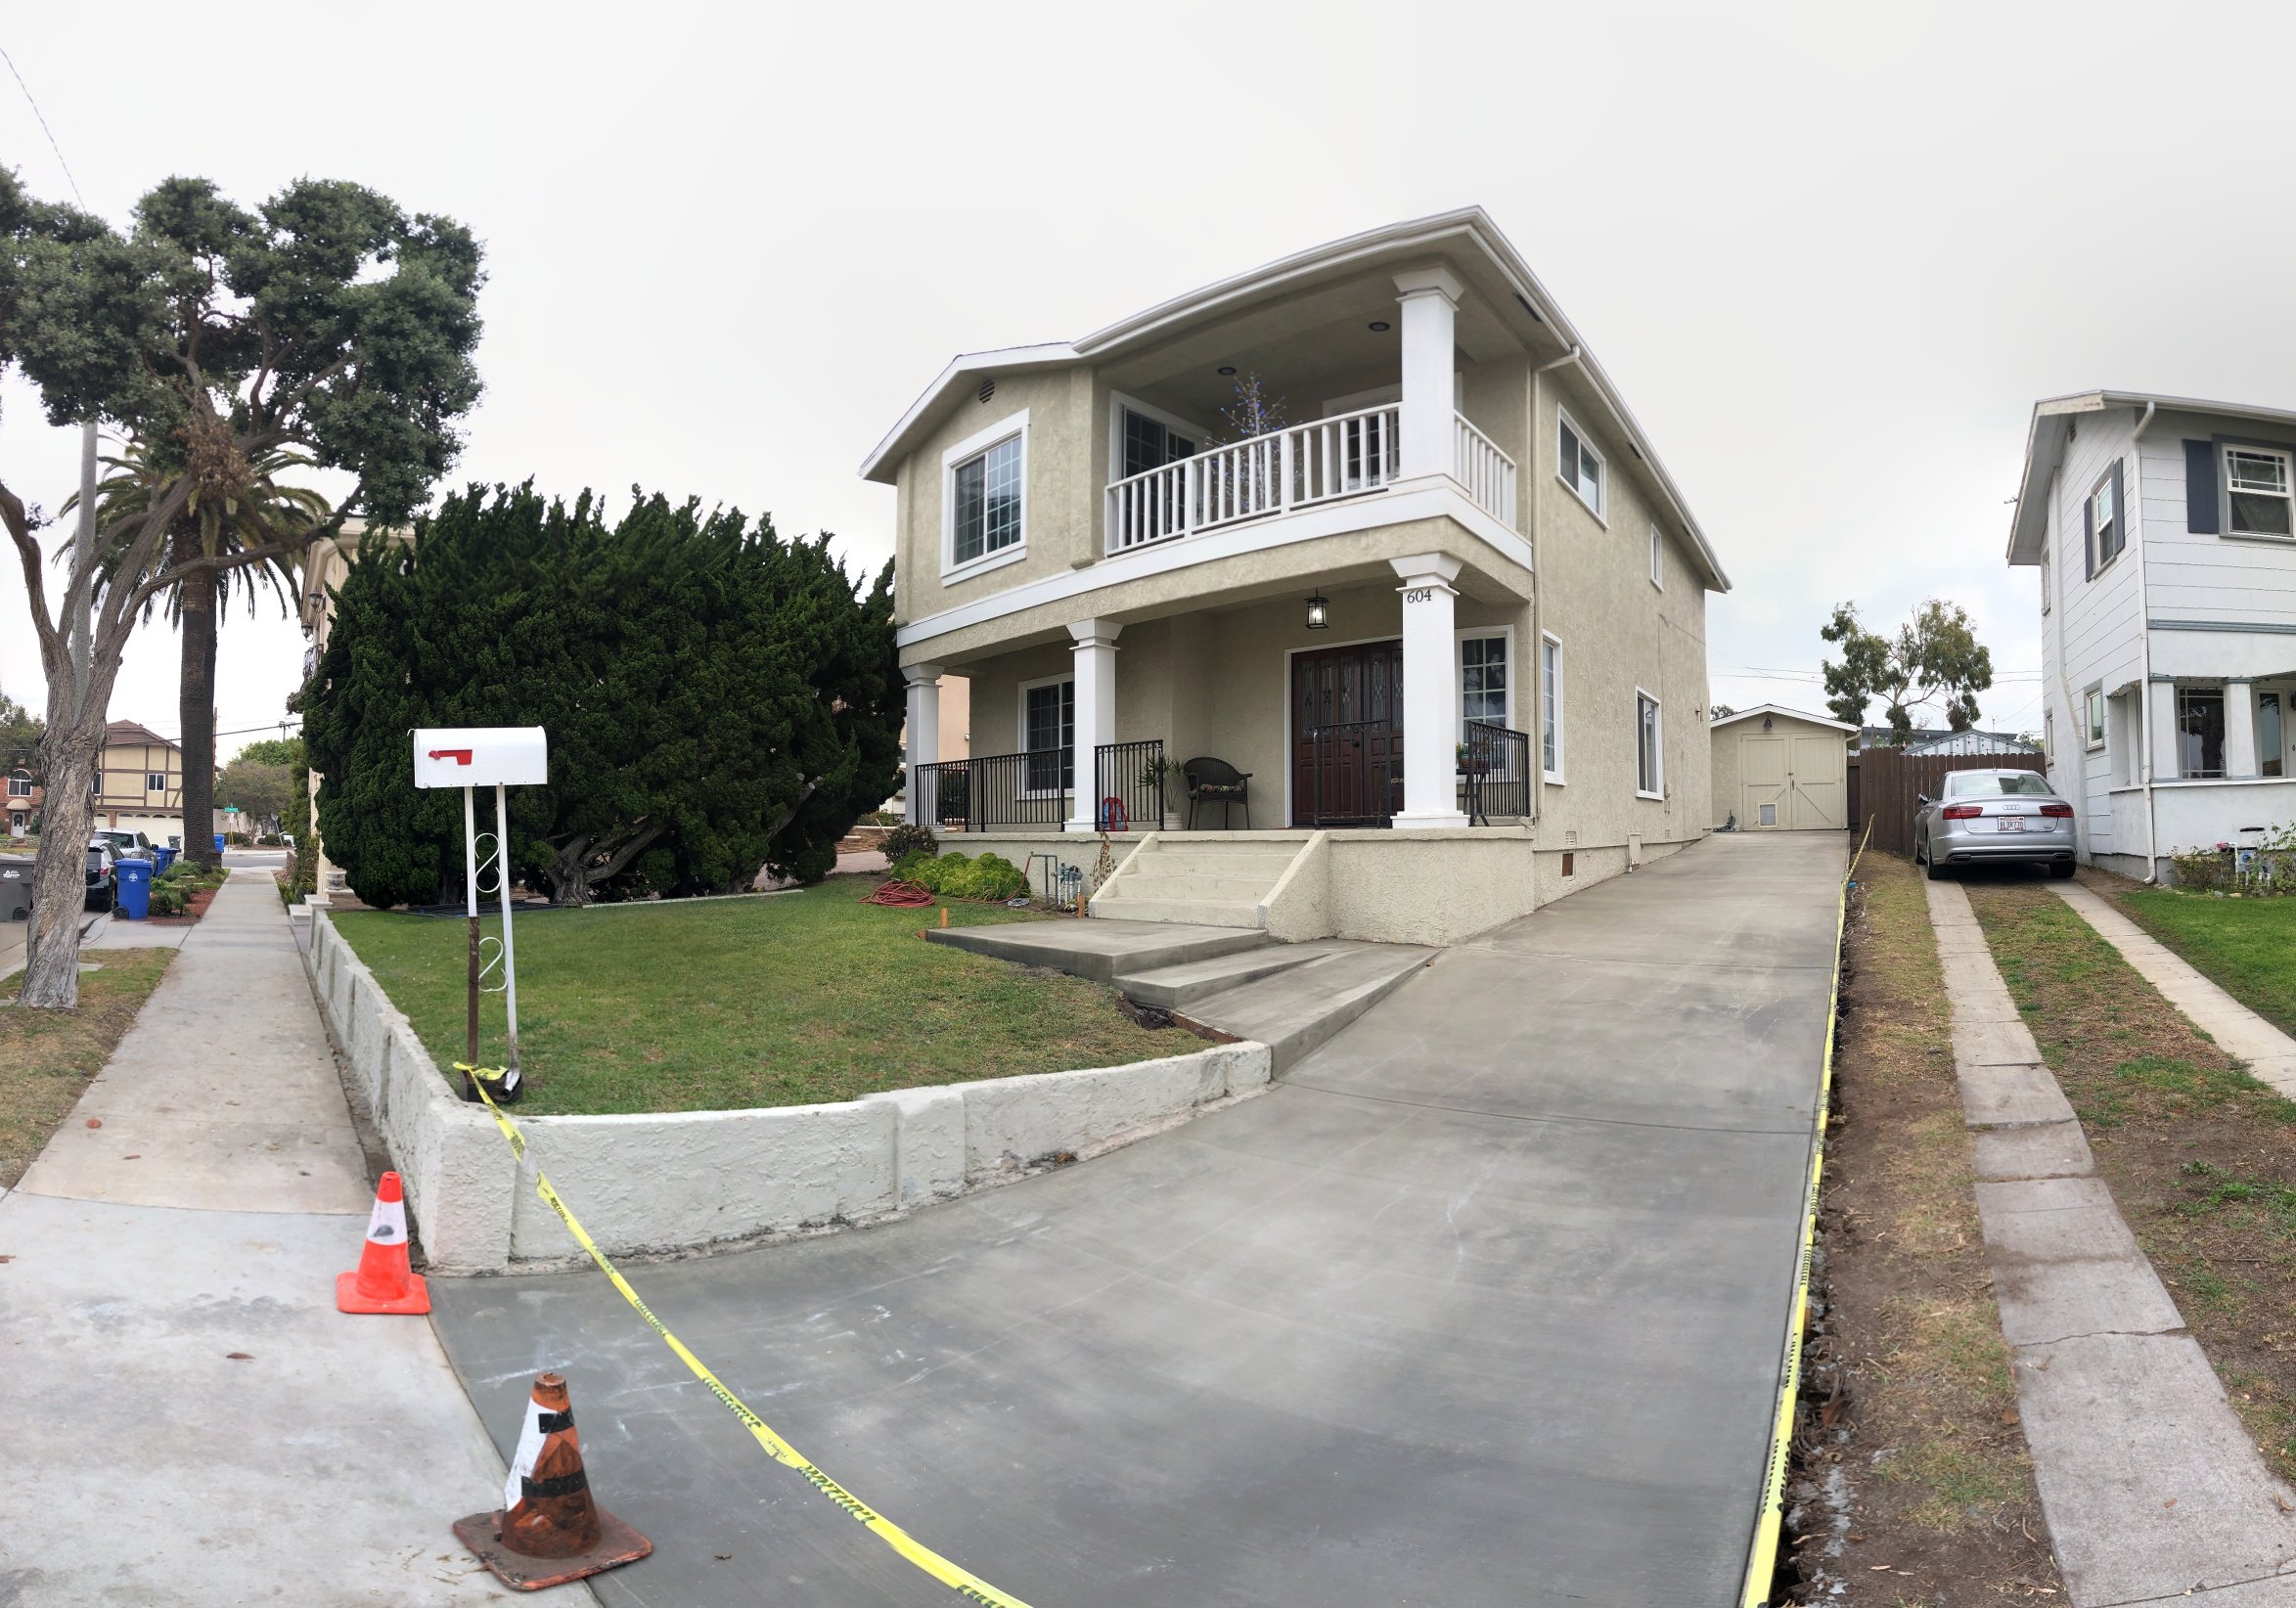 Anzack Residence: Driveway Replacement in Redondo Beach, CA